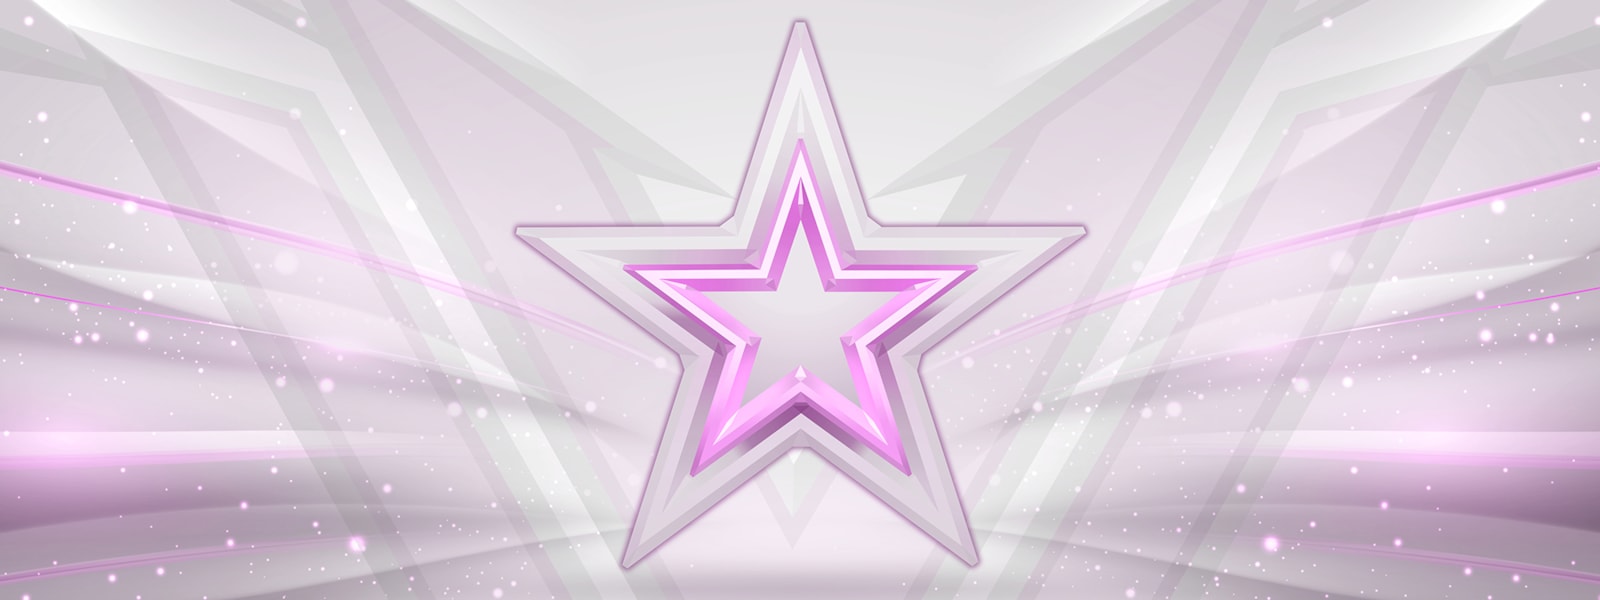 star with abstract background